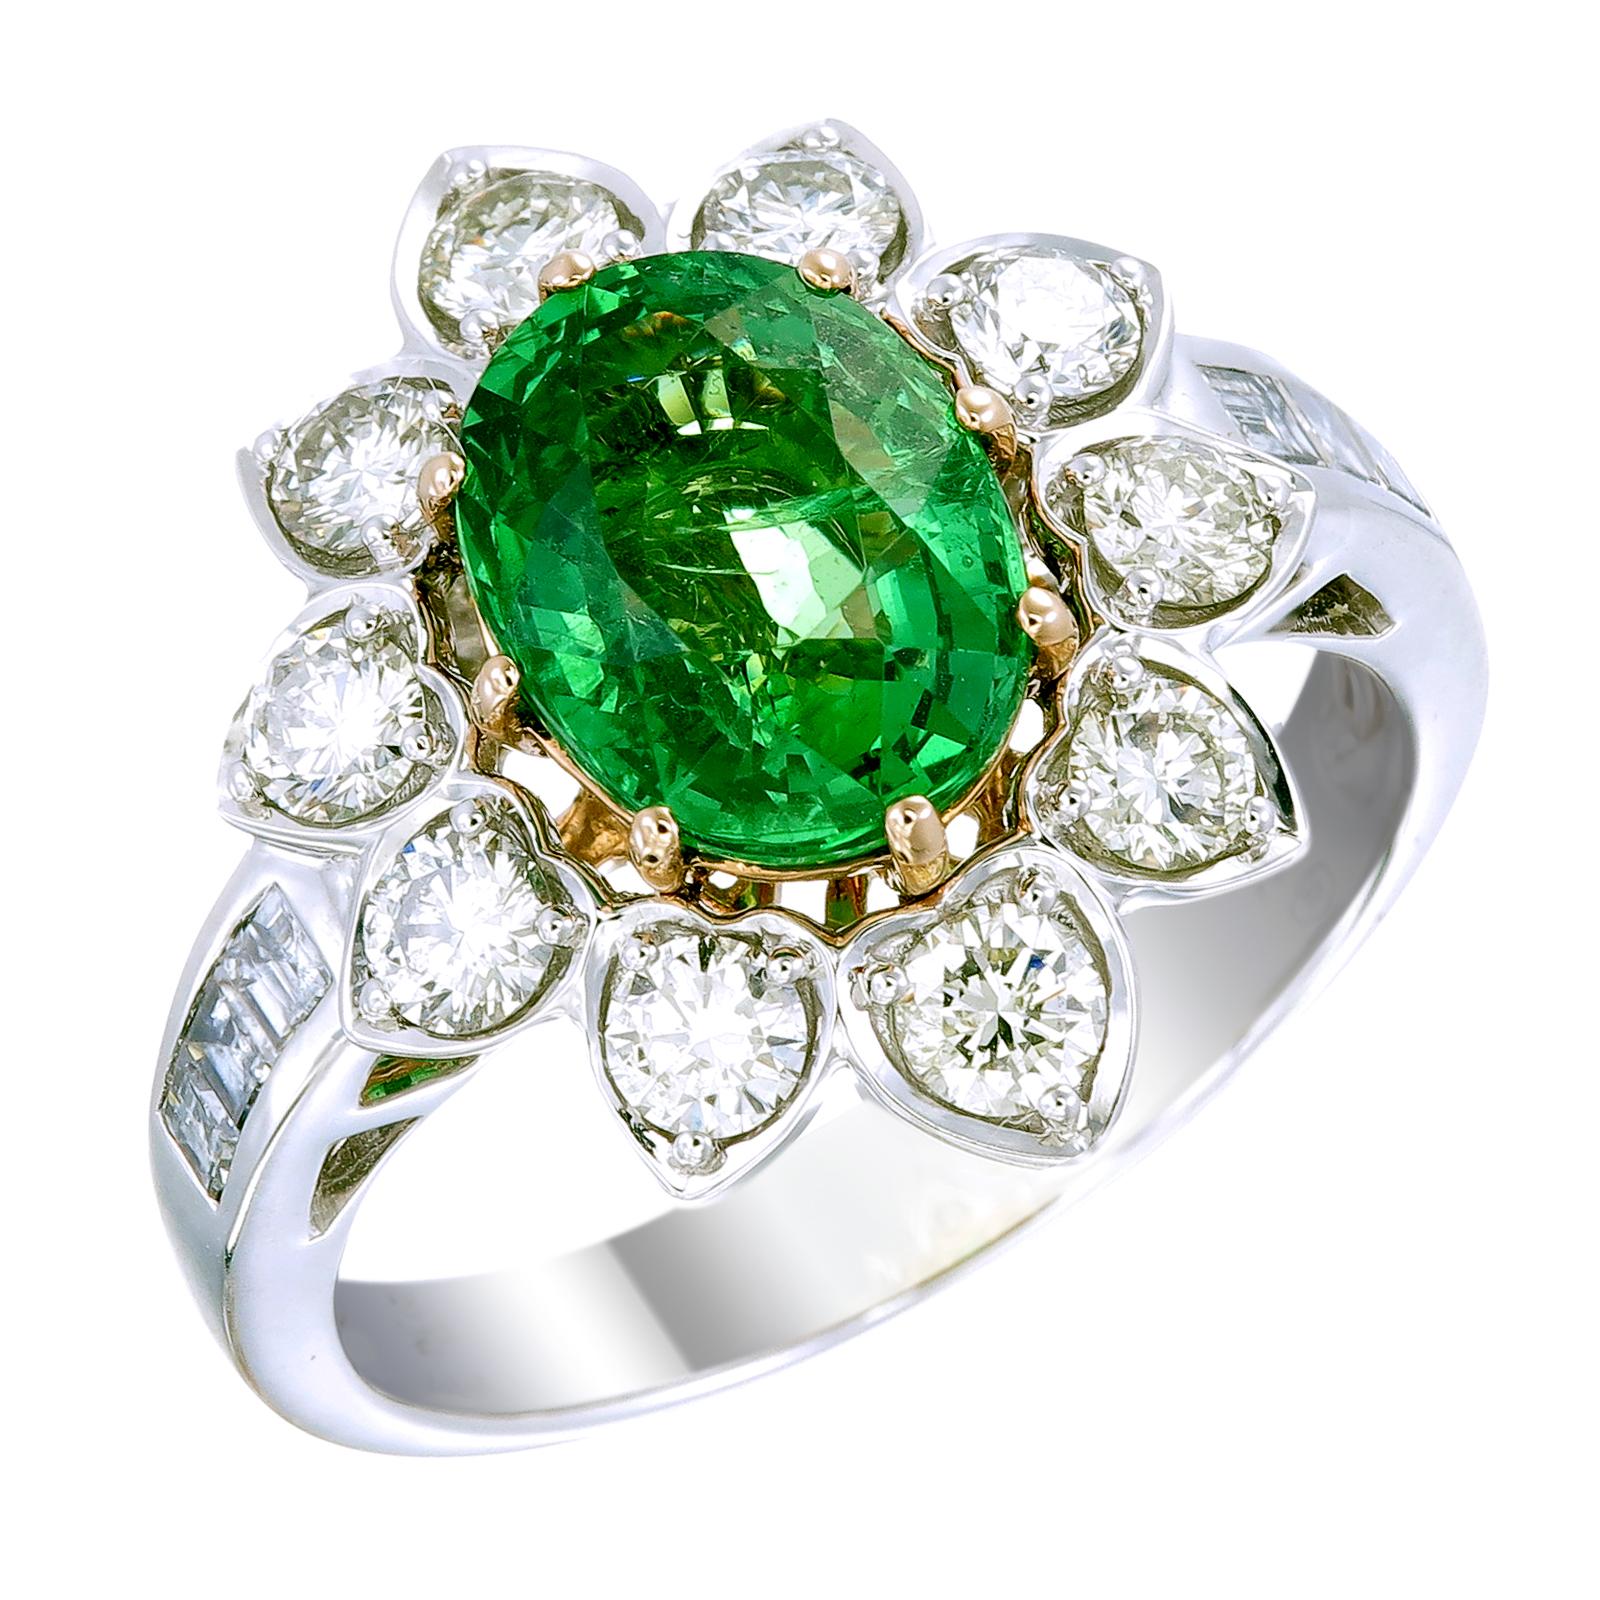 Oval Cut Zorab Creation Green Goddess A 2.89-Carat Oval-Shaped Tsavorite Ring For Sale